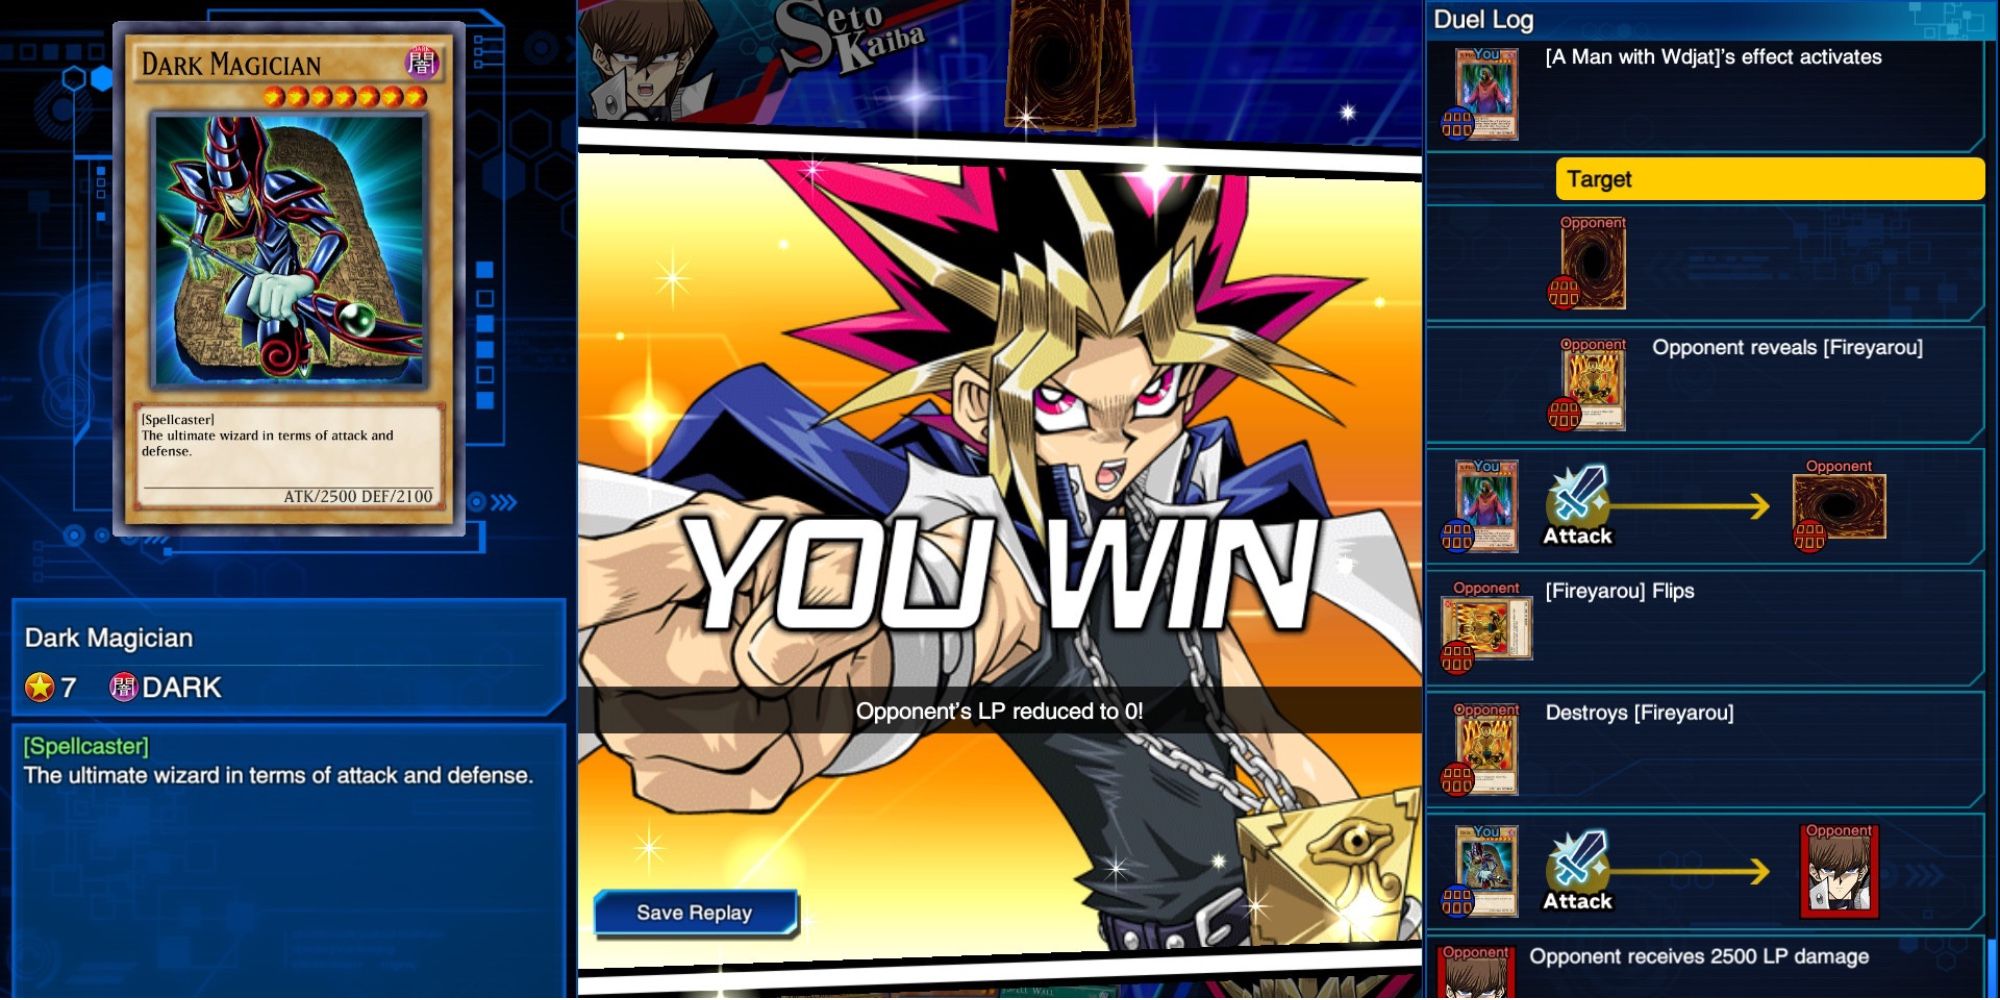 Free Anime Games on Steam - Yu-Gi-Oh! Duel Links - Player wins duel